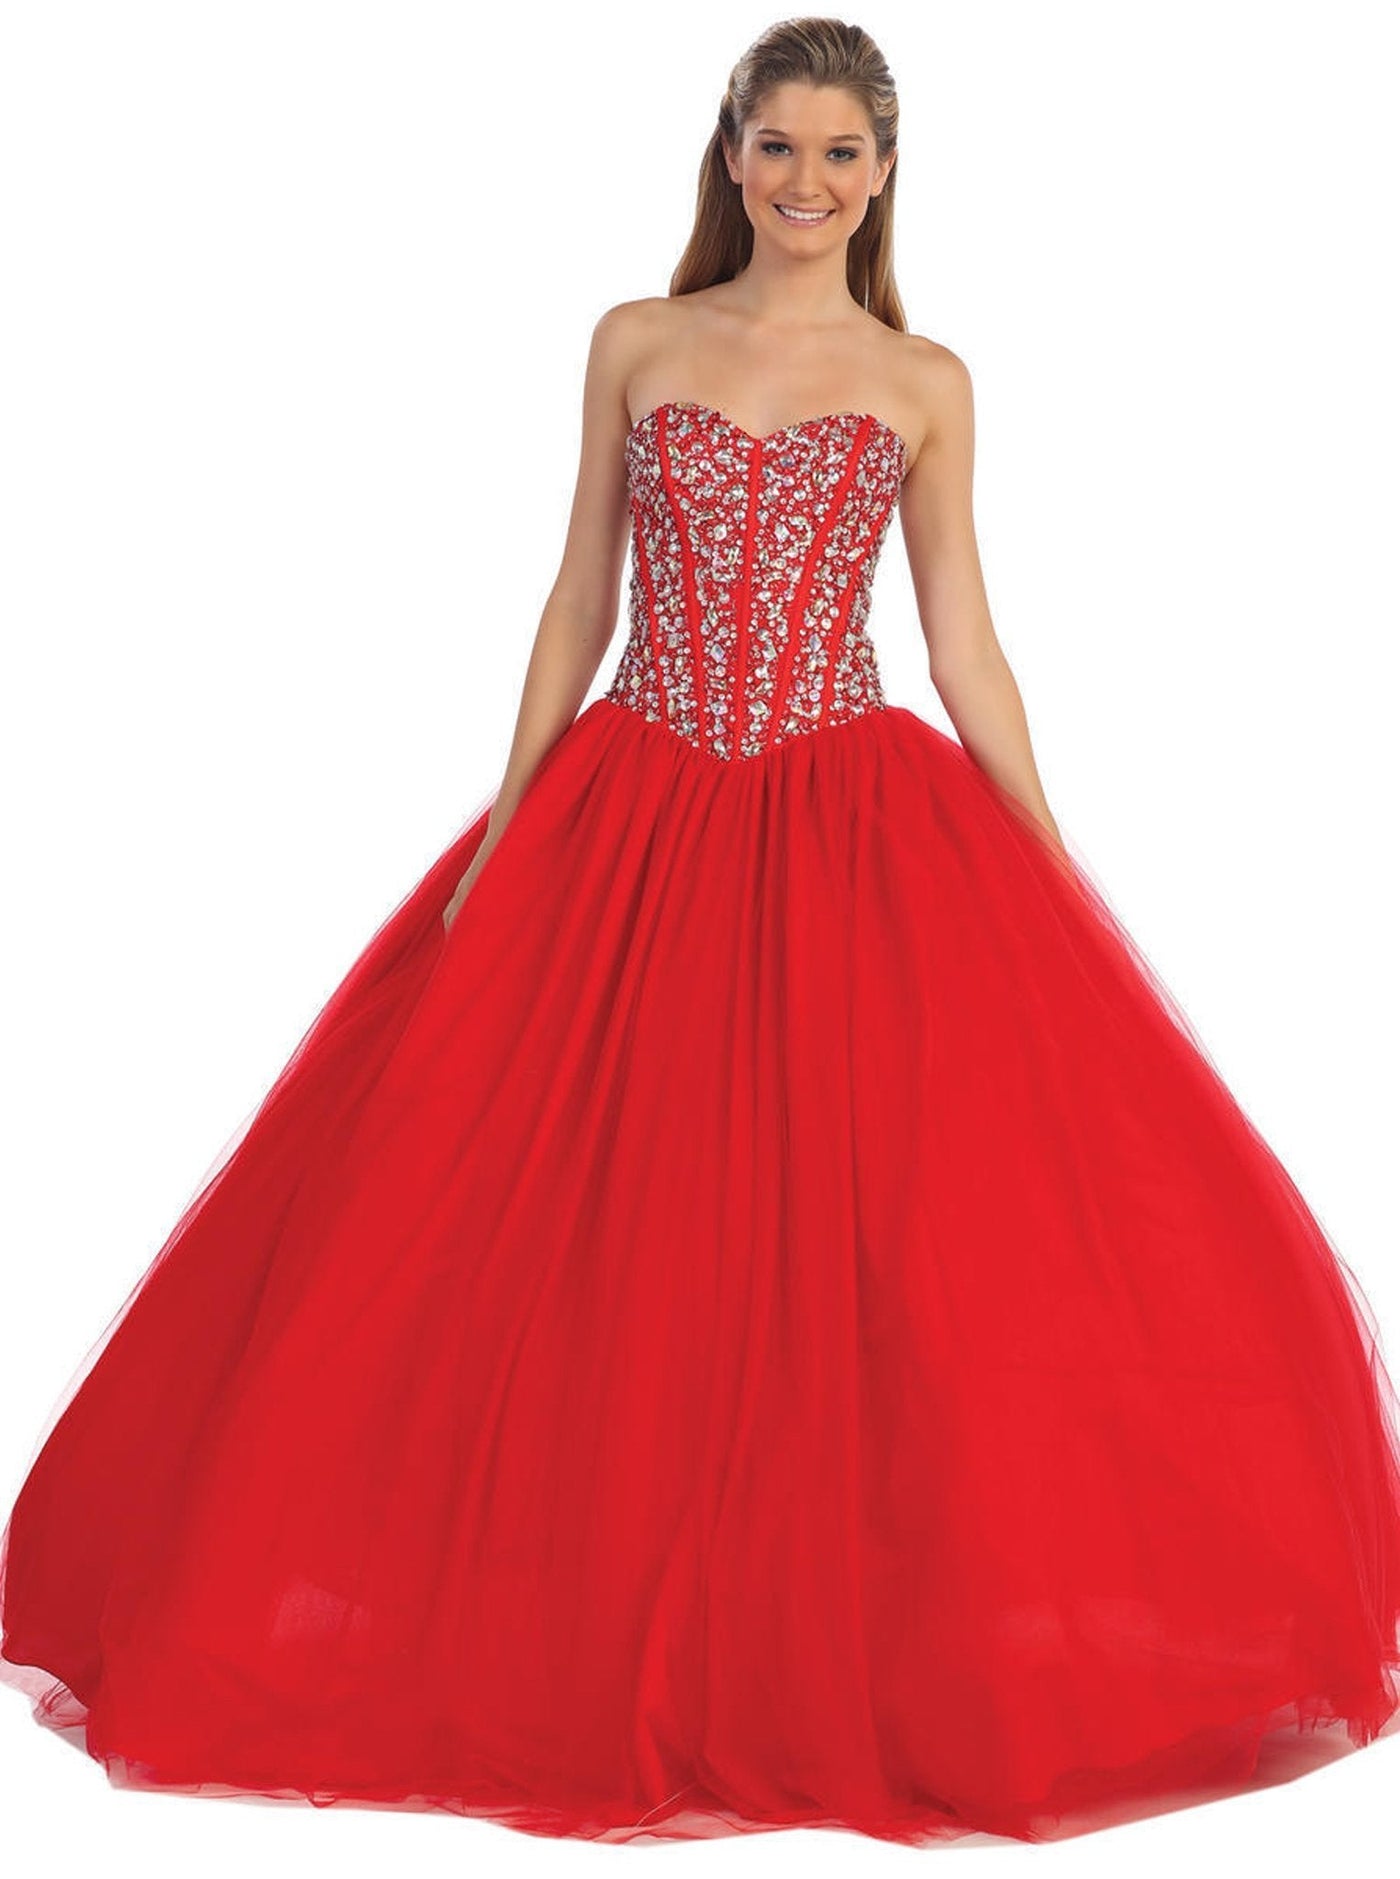 Dancing Queen - 9094 Embellished Sweetheart Evening Gown Special Occasion Dress XS / Red